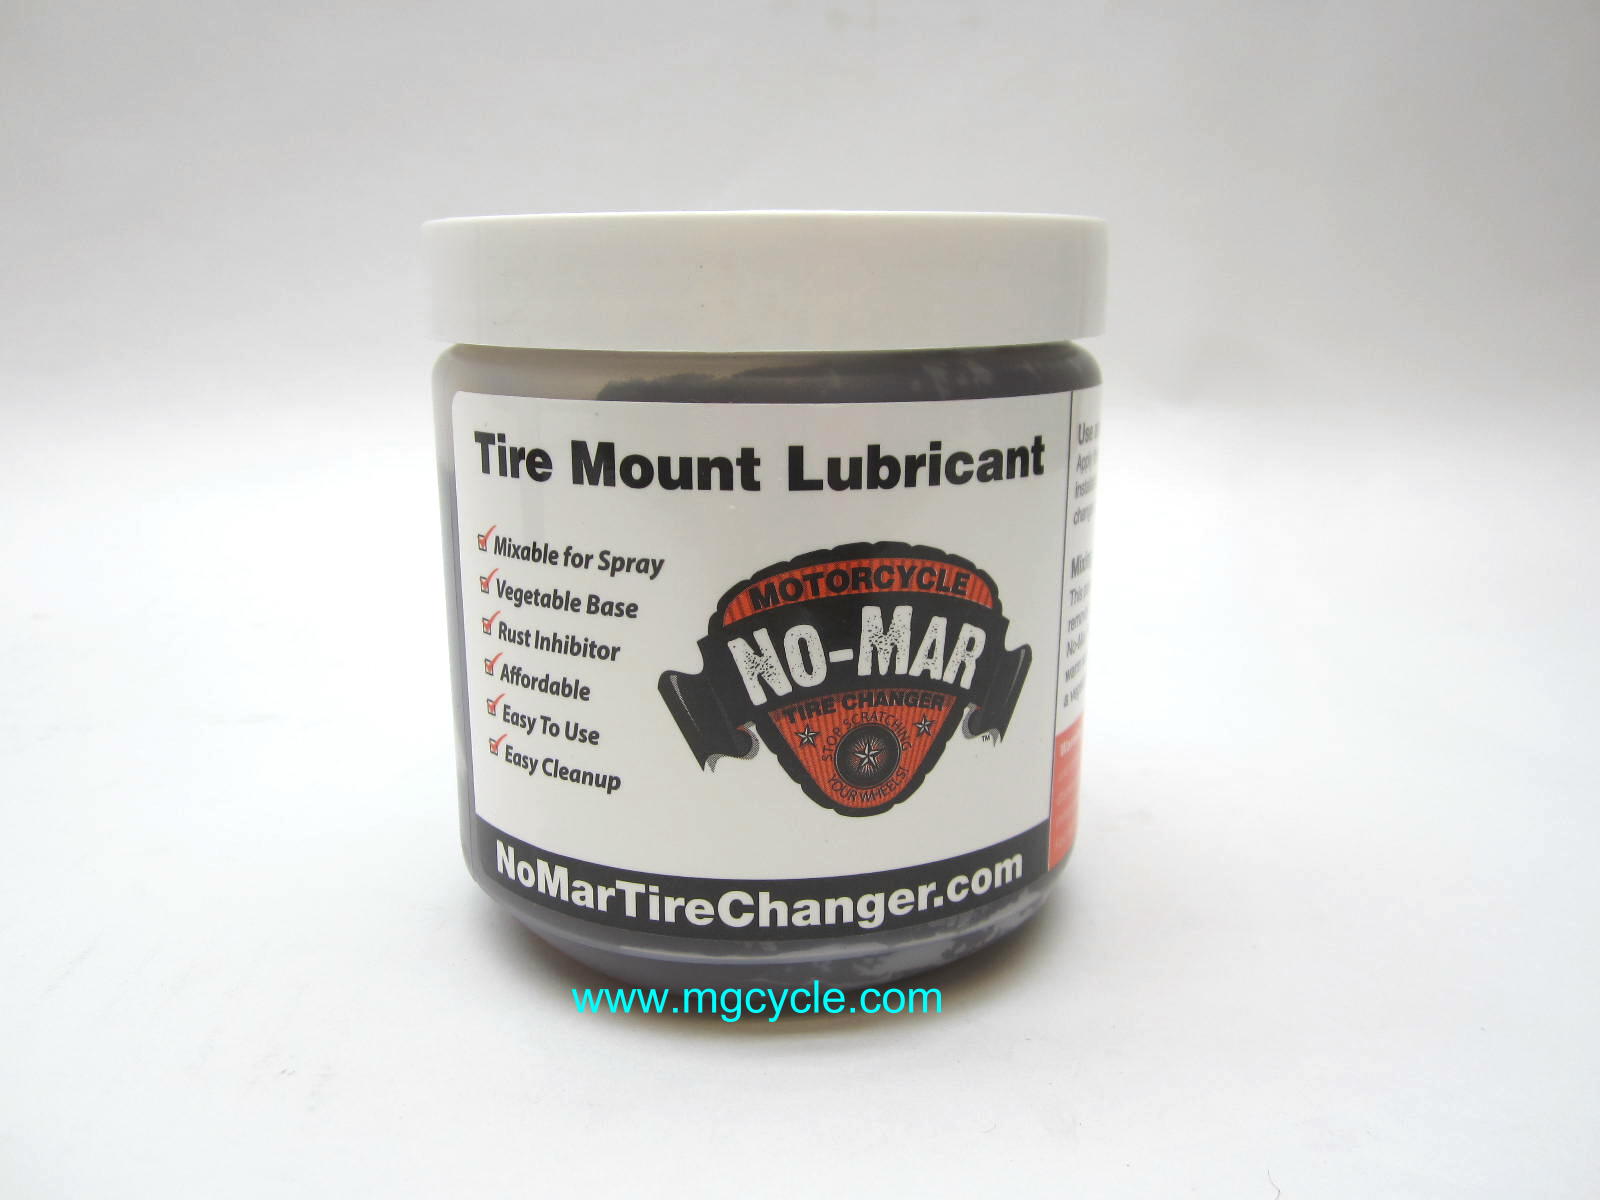 Tire mounting lubricant, 1 pint jar